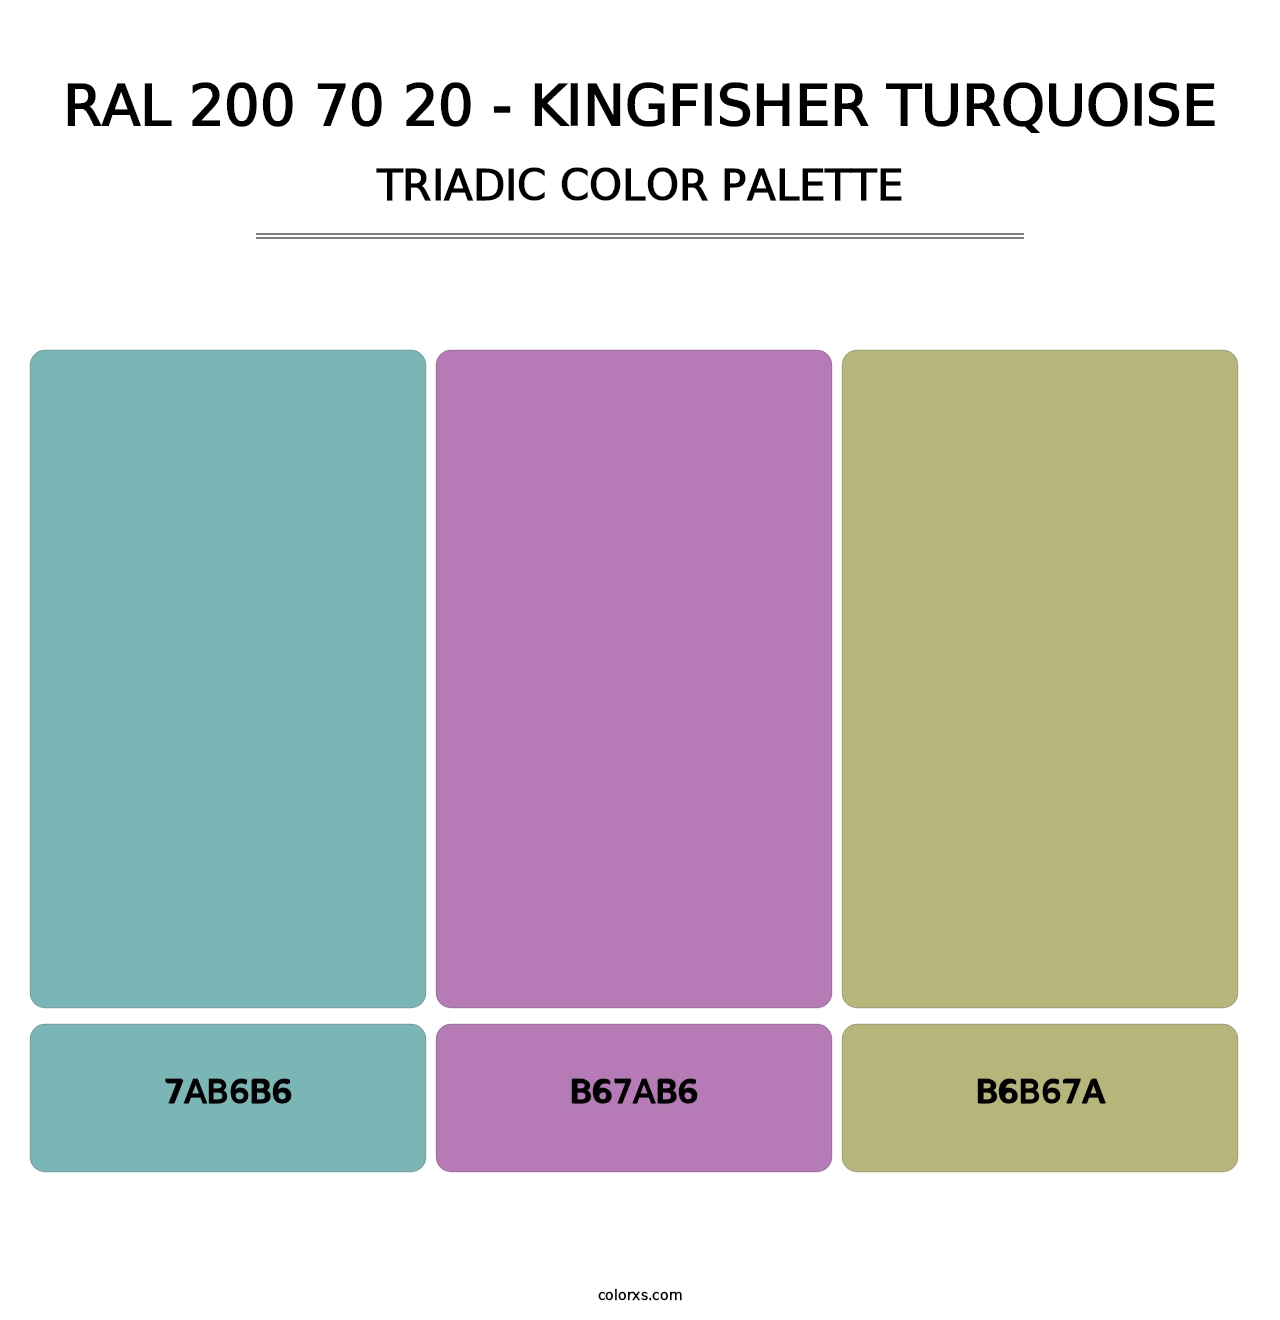 RAL 200 70 20 - Kingfisher Turquoise - Triadic Color Palette